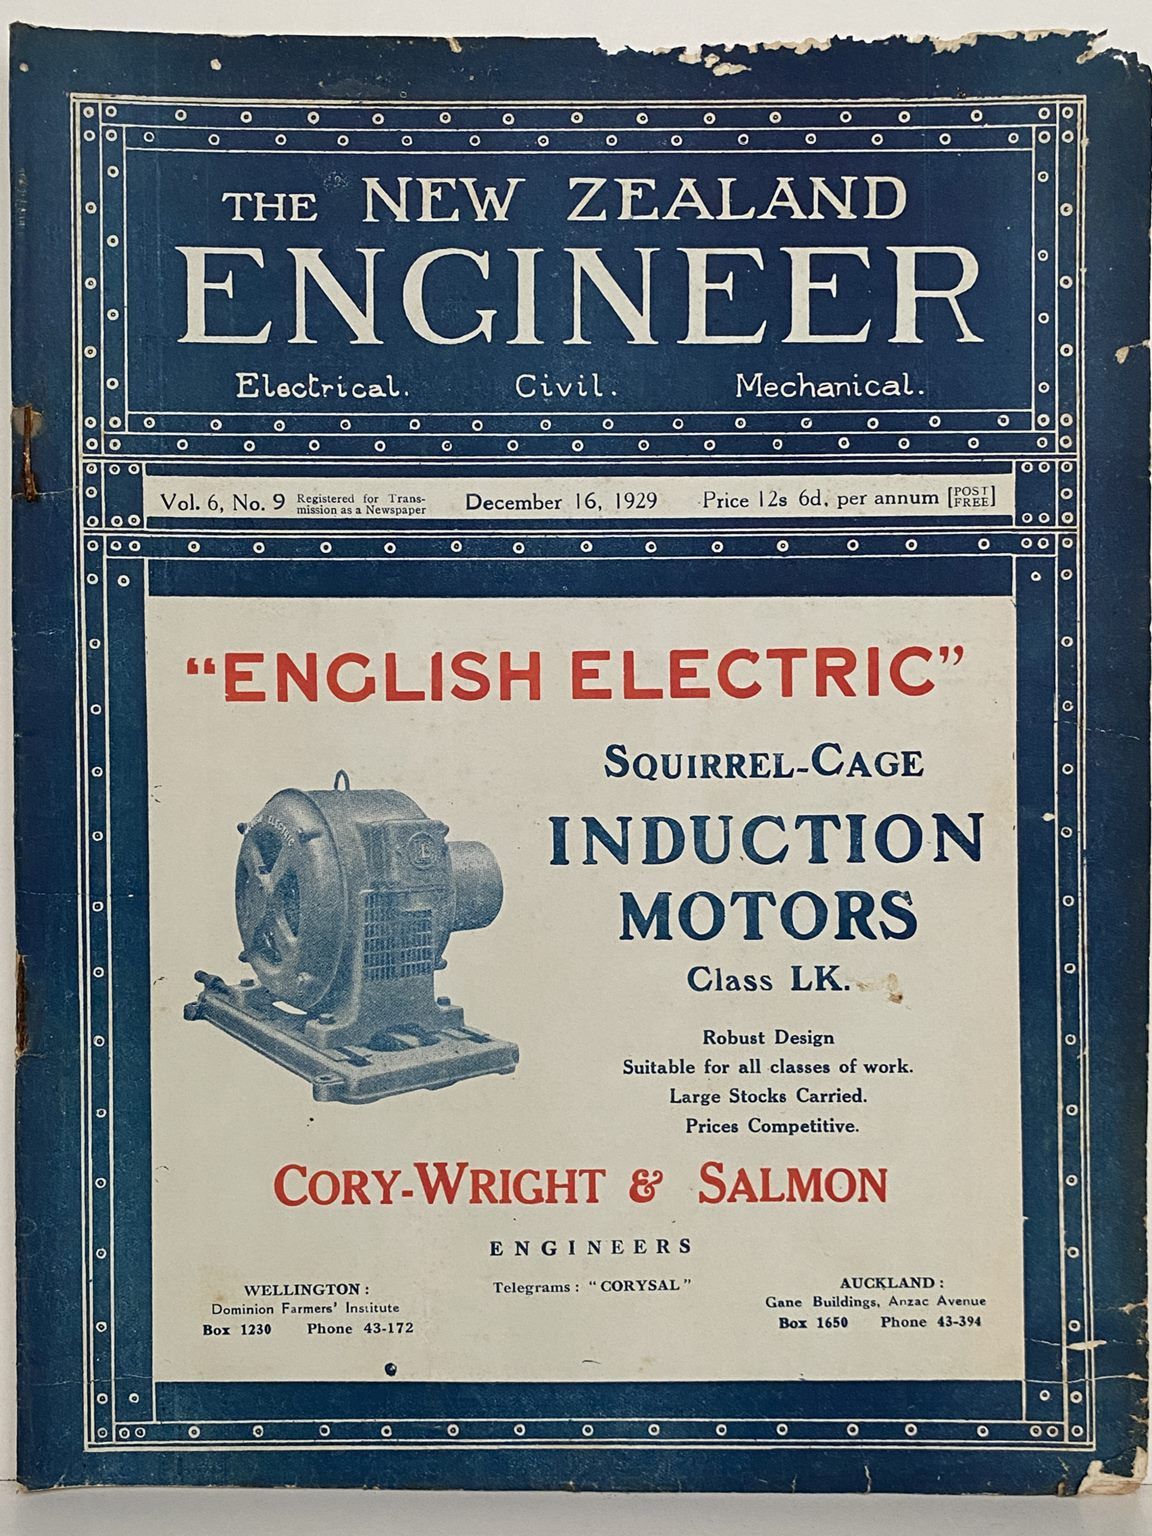 OLD MAGAZINE: The New Zealand Engineer Vol. 6, No. 9 - 16 December 1929